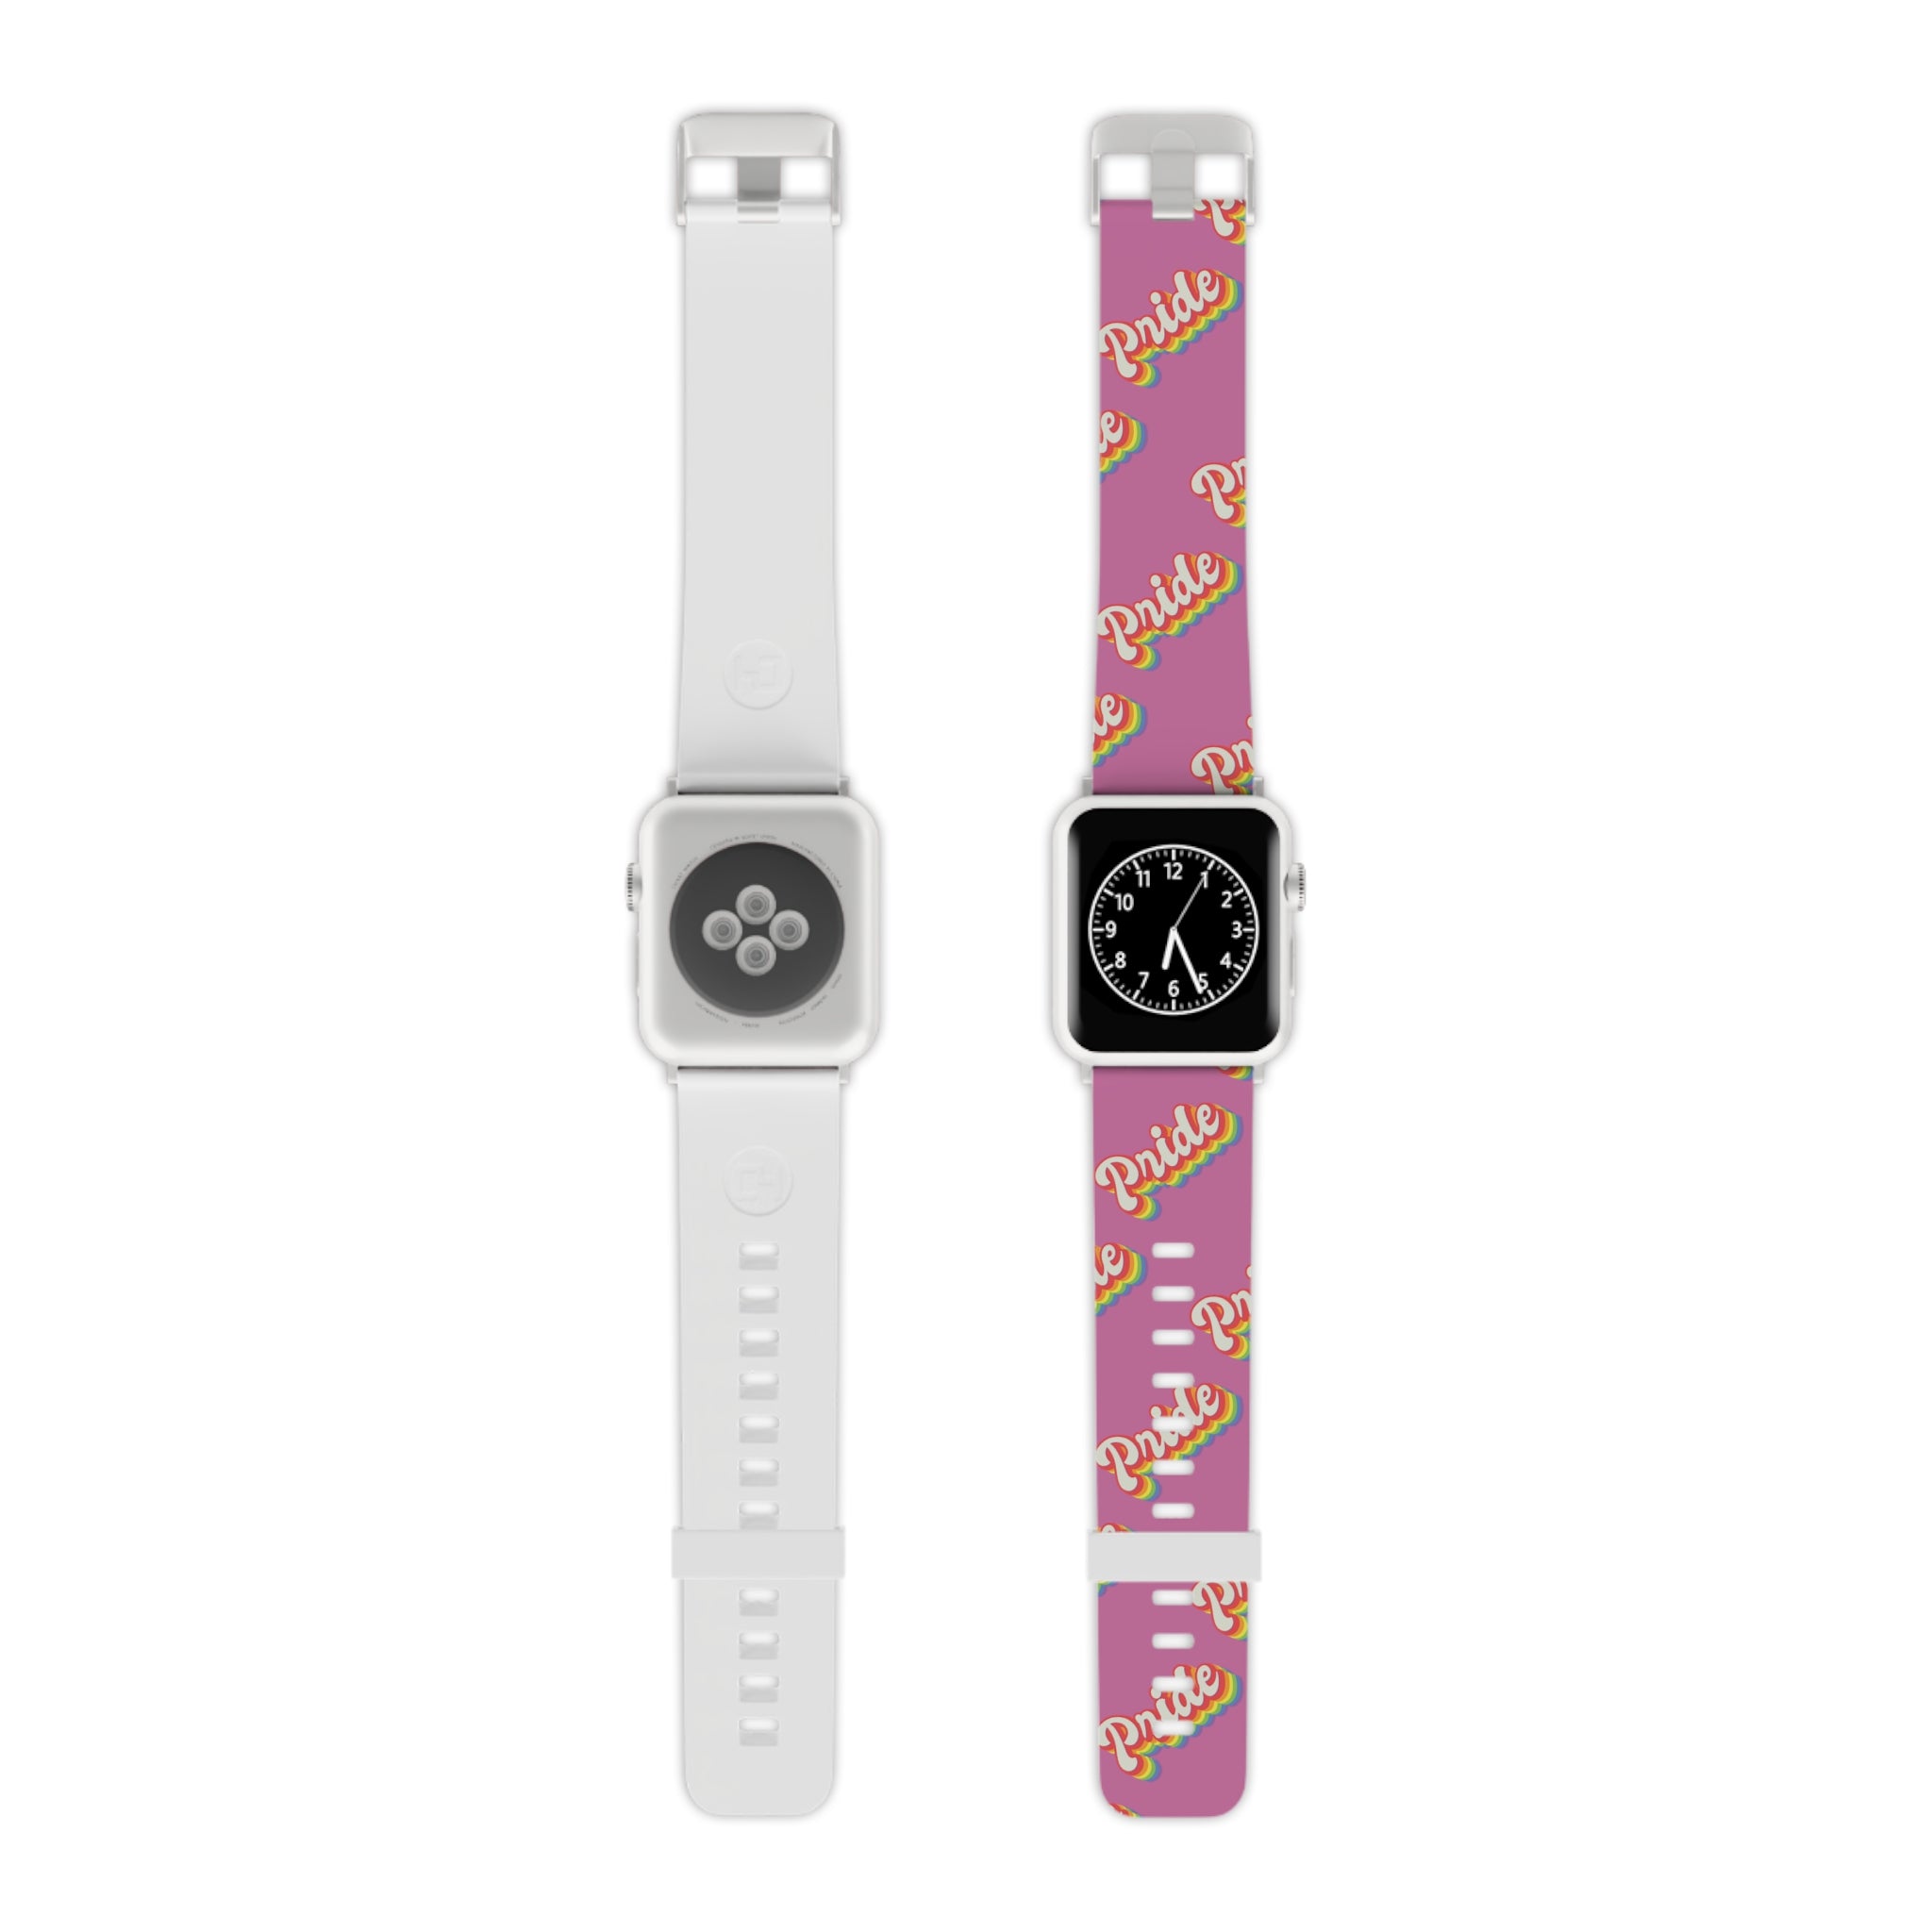 A fashionable alternative to the original Pride Band for Apple Watch T-Shirt, these custom-printed pink and white straps are a stylish and personalized accessory for your device.